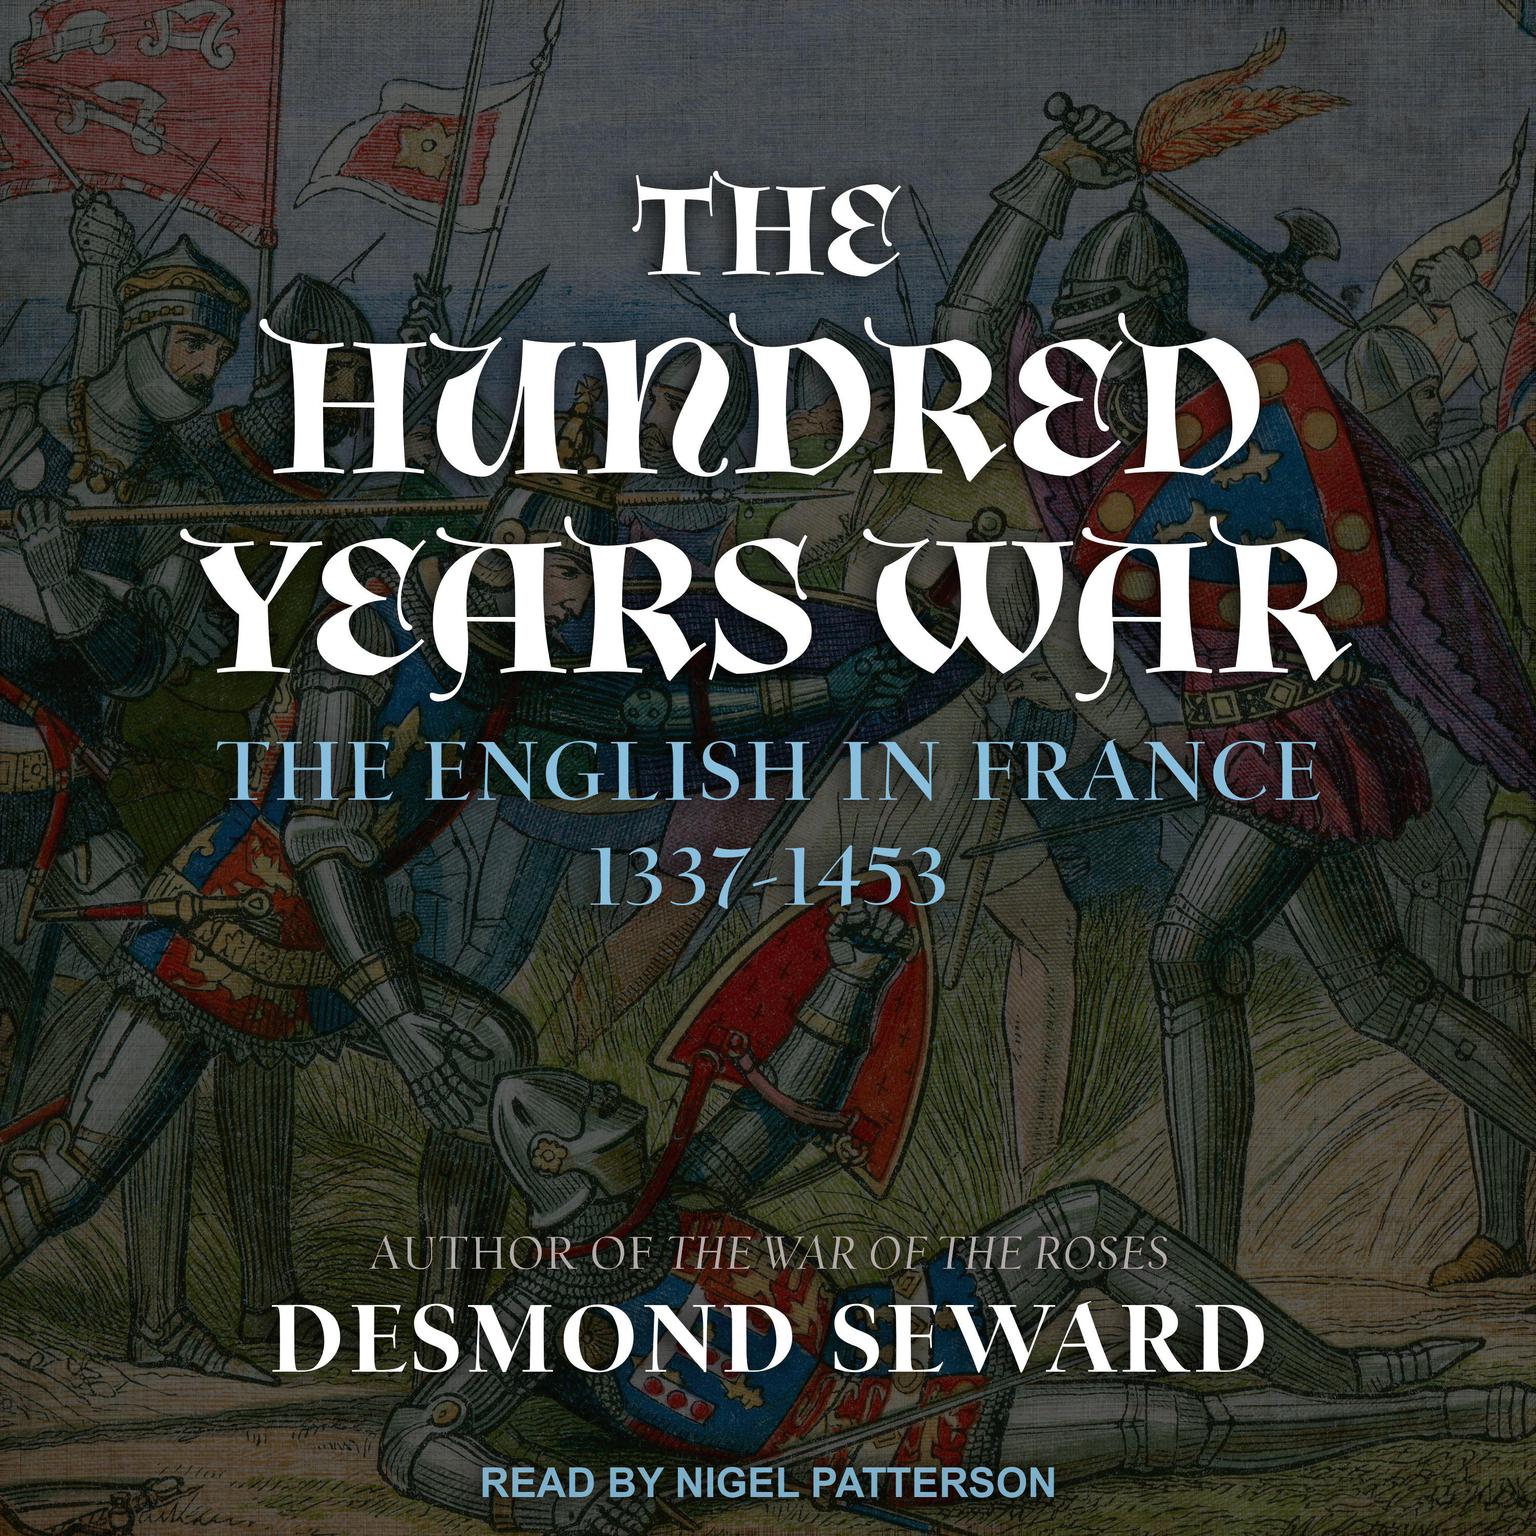 The Hundred Years War: The English in France 1337-1453 Audiobook, by Desmond Seward